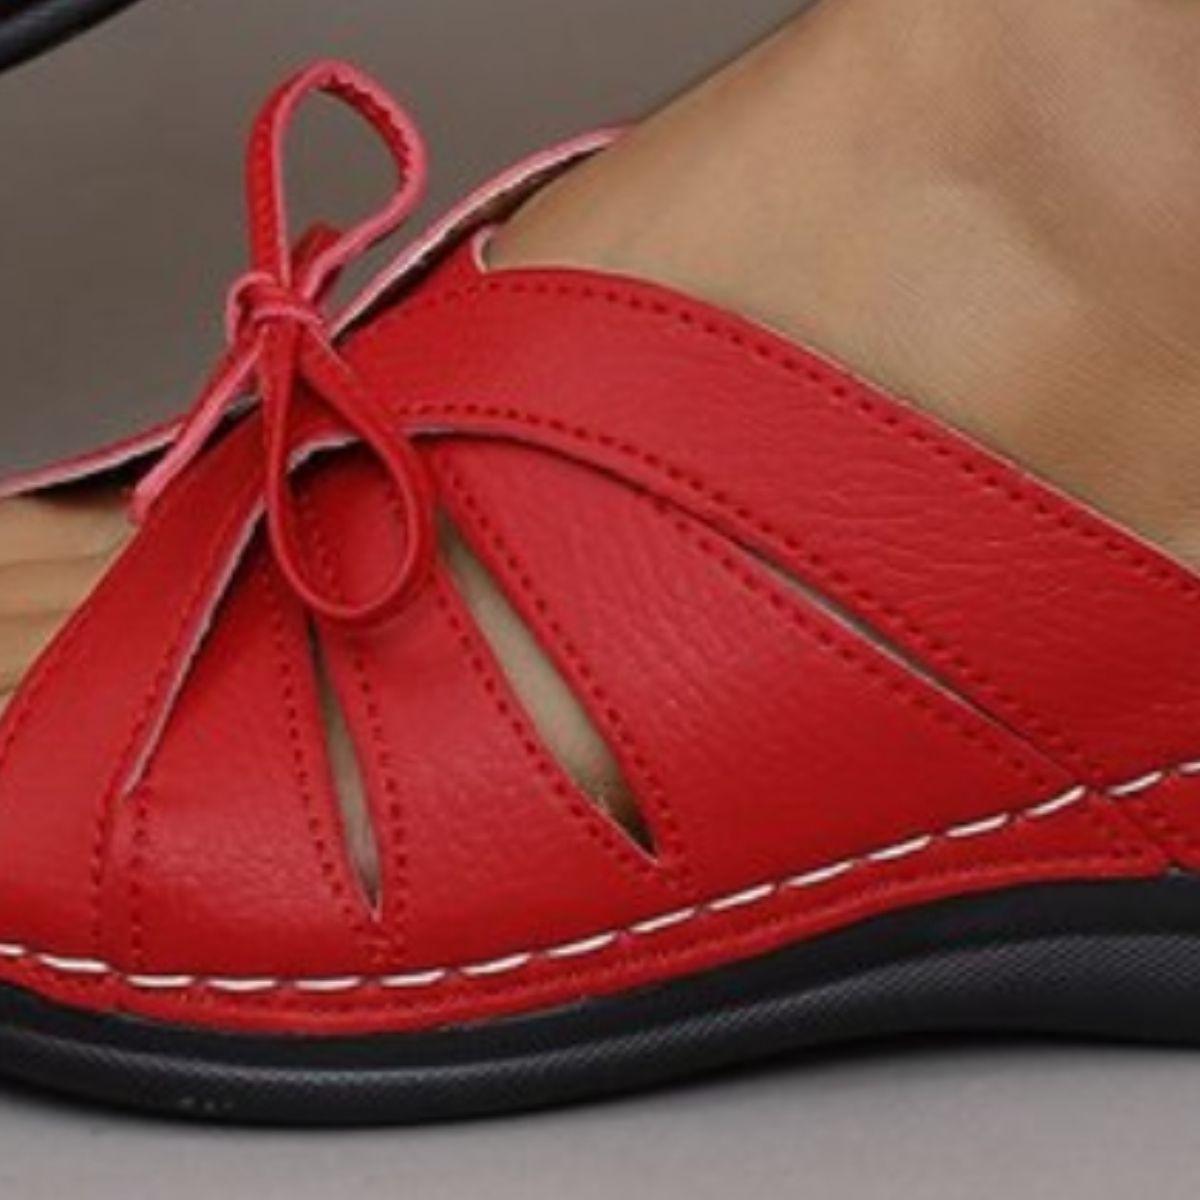 a close up of a person wearing red shoes